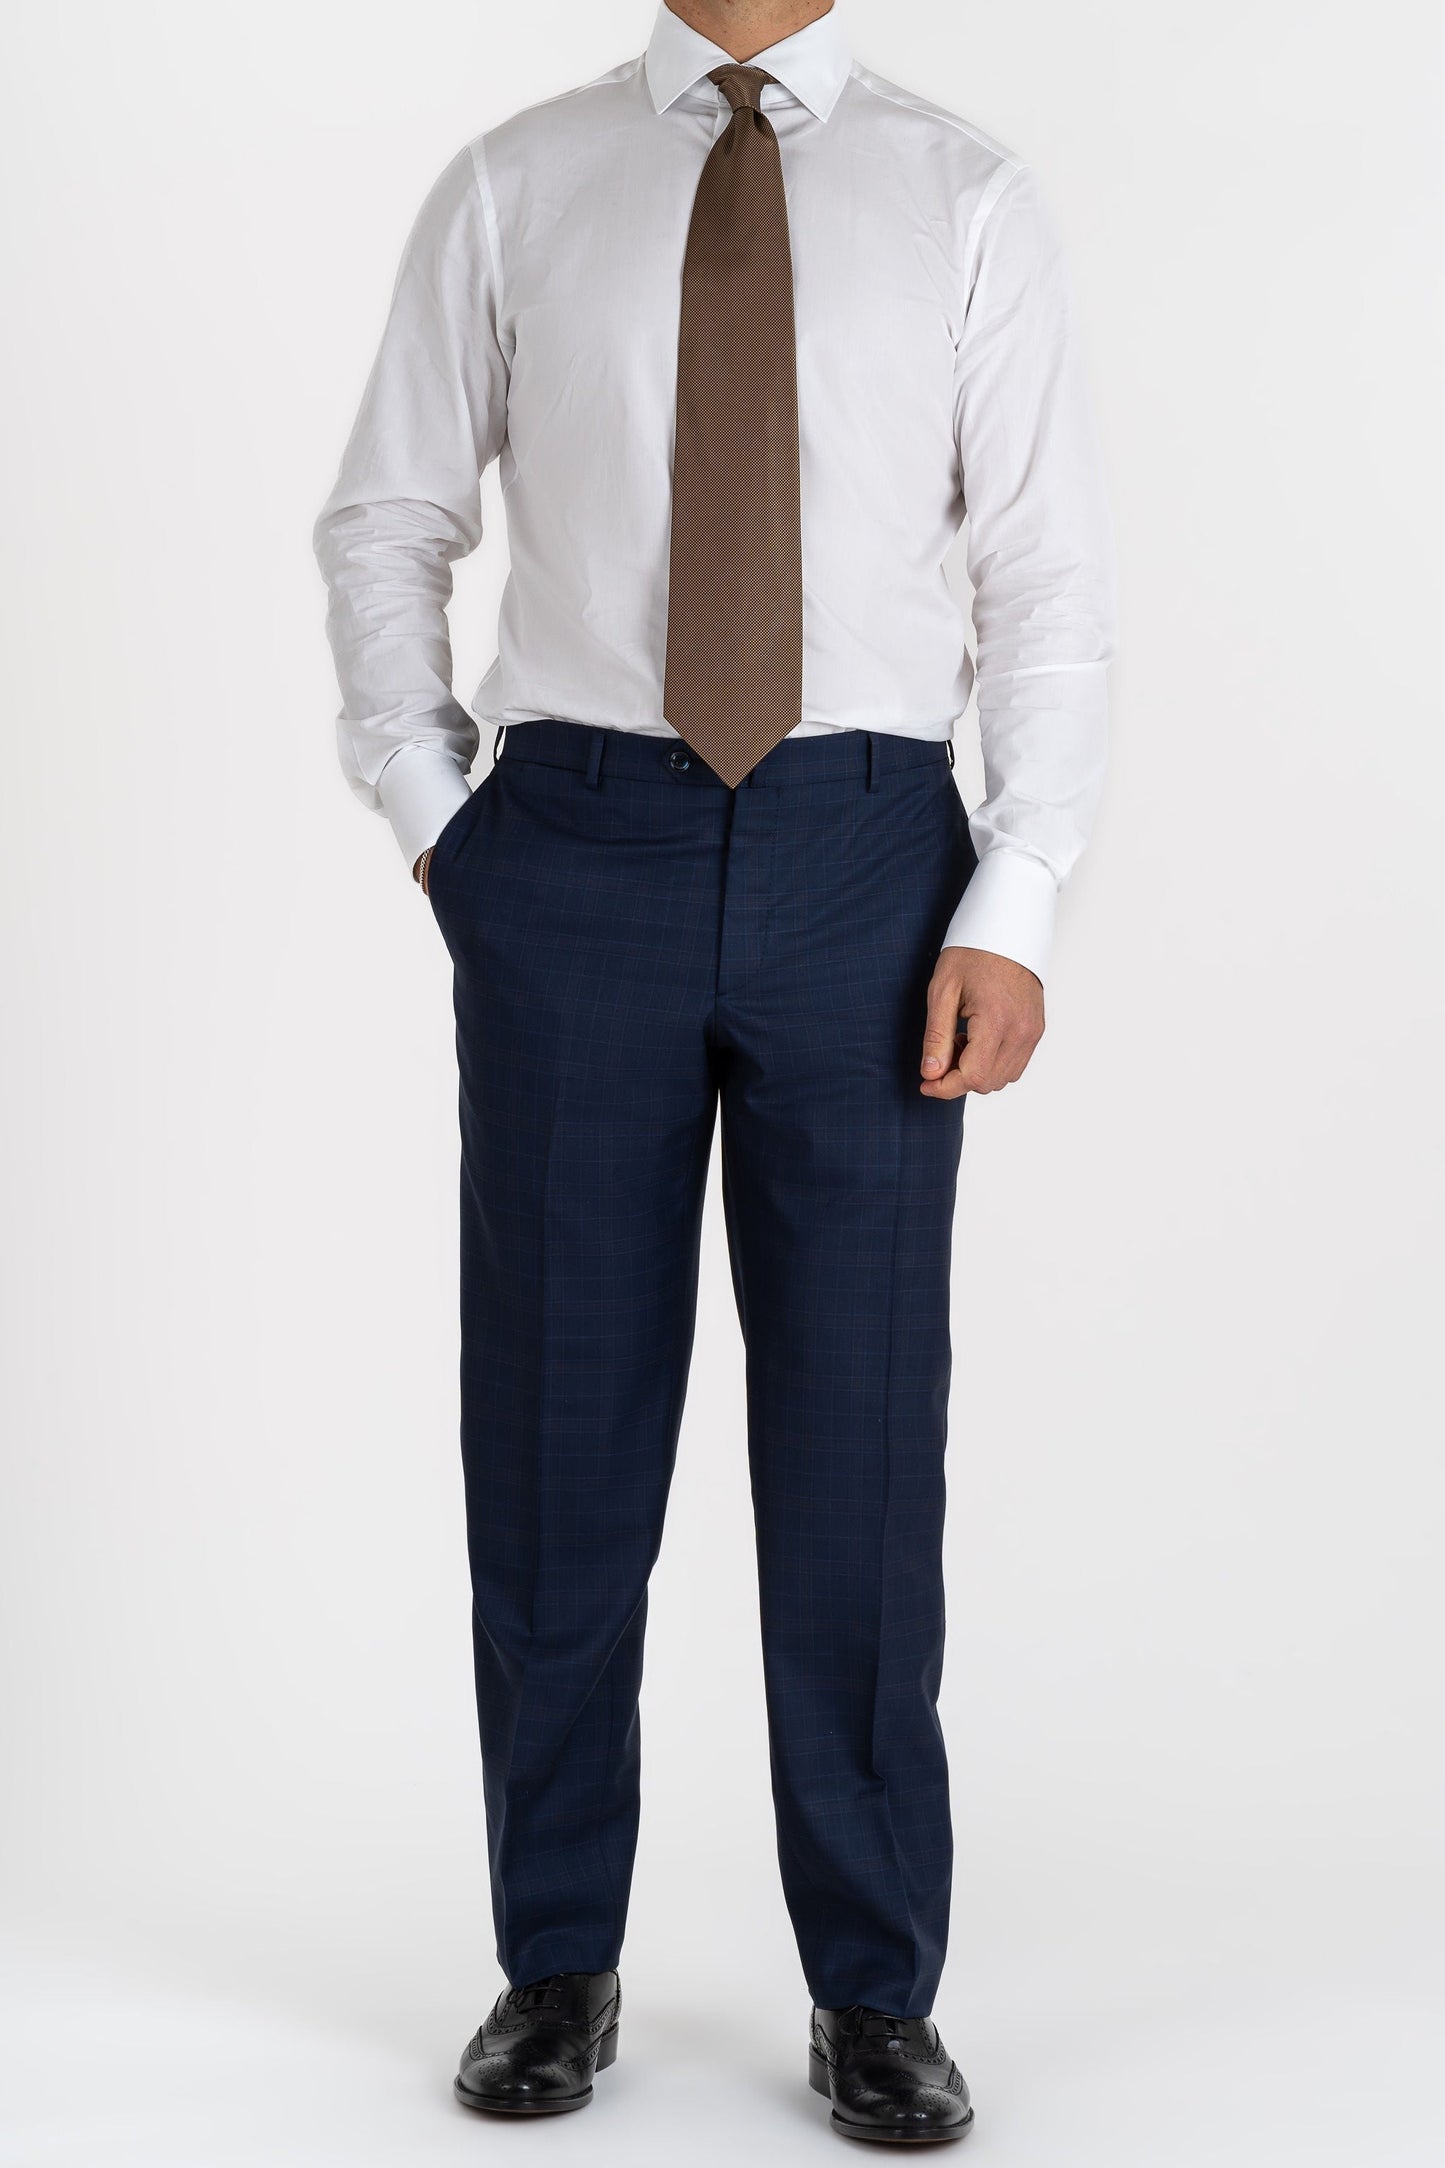 This Sartoria dei Duchi suit is made with a Caccioppoli 150s fabric made with 96% wool and 4% of Cashmere. The fabric has a midnight blue and light brown checked pattern. The jacket is fully lined and is made with two buttons, flap pockets and classic lapel. Pants are made without pleats, with American style pockets and comfortable no- slip belt loops. Side stitching on jacket and trousers.